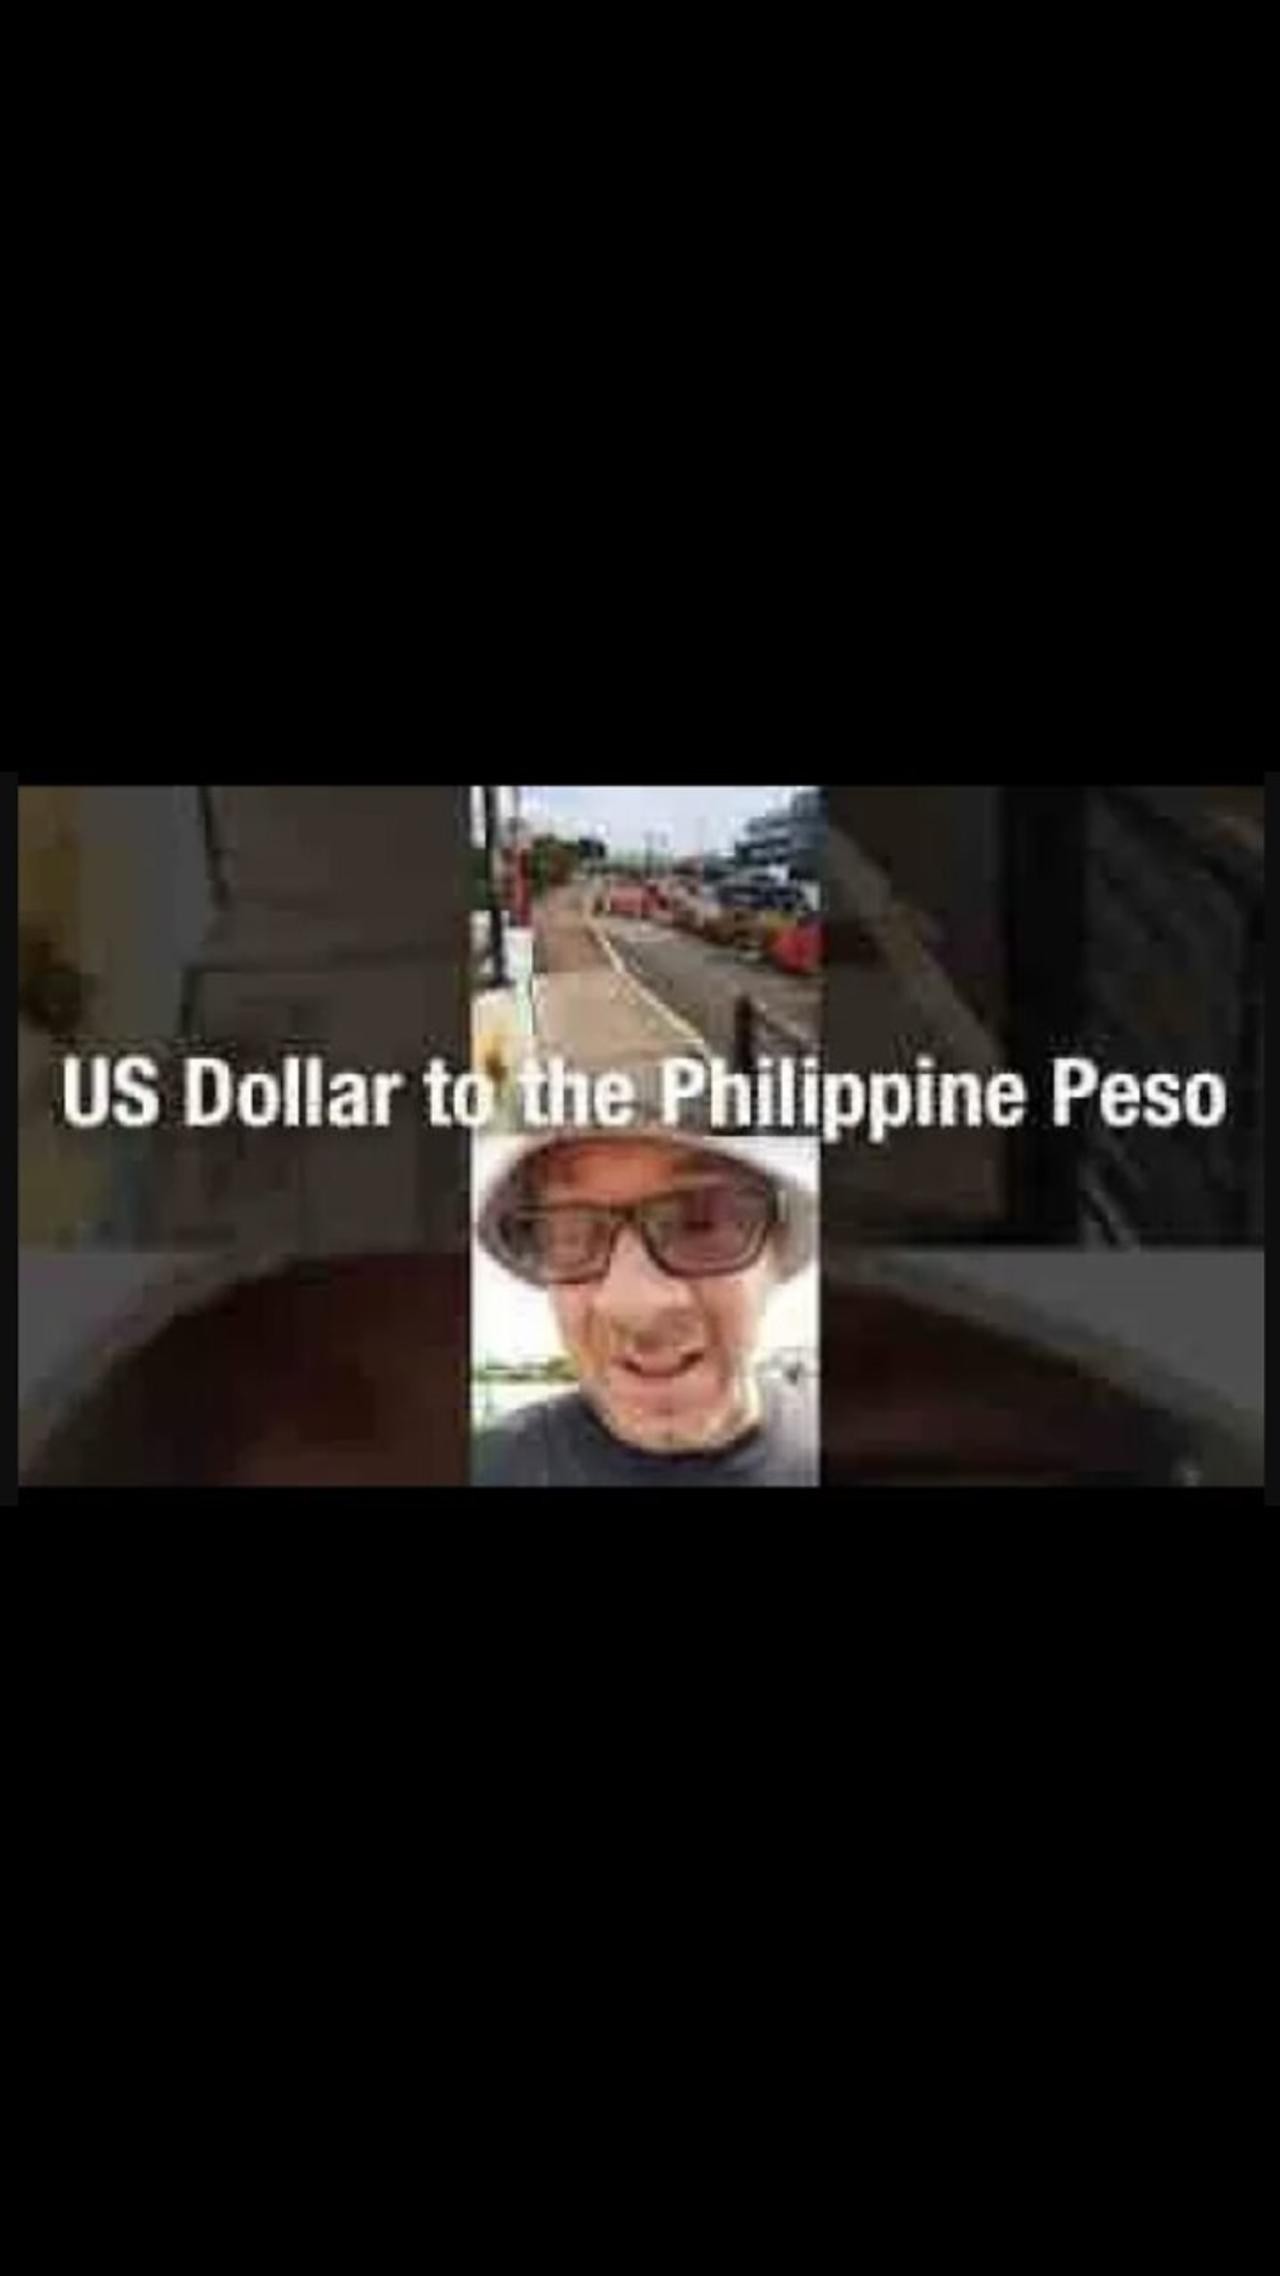 Strong US Dollar to the Philippine Peso #philippines